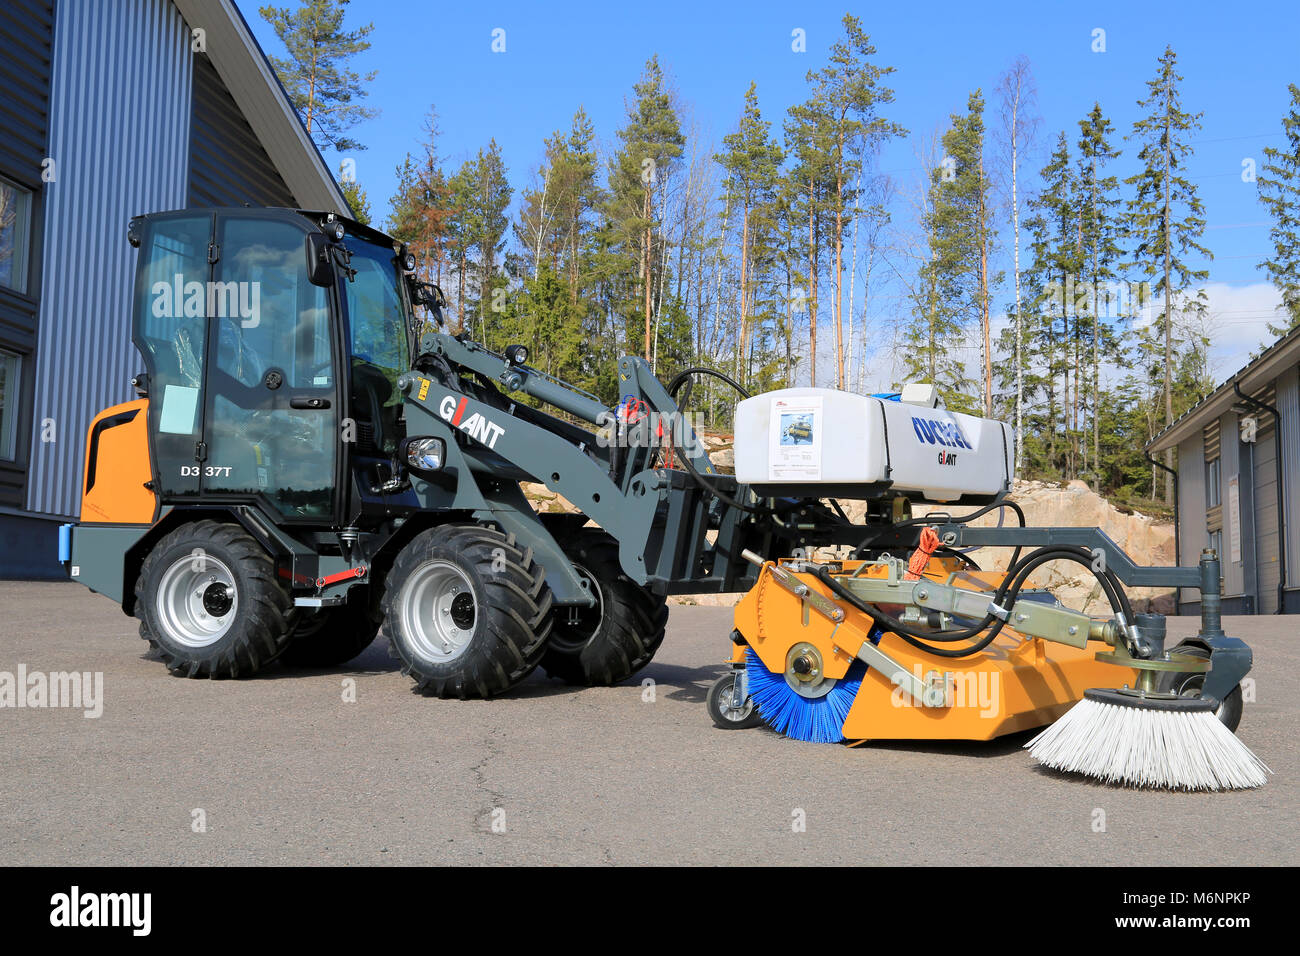 LIETO, FINLAND - MARCH 22, 2014: Giant D337T wheel loader with sweeper displayed at Villilansi heavy equipment marketing event on March 21-22, 2014. Stock Photo